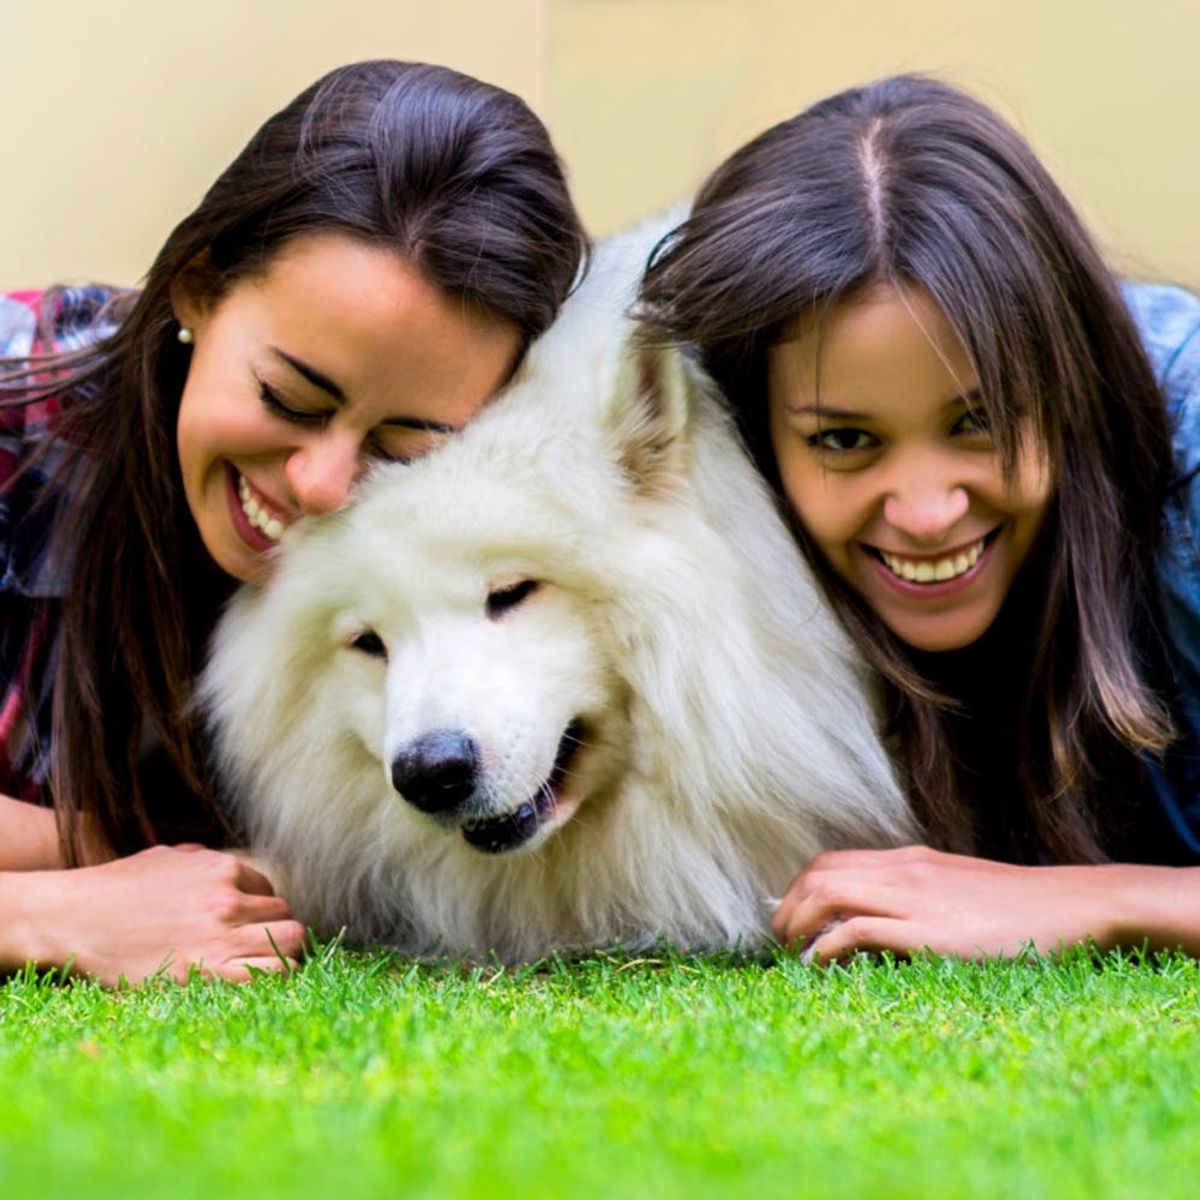 6 Signs You’re Not Quite Ready to Get a Pet With Your Significant Other